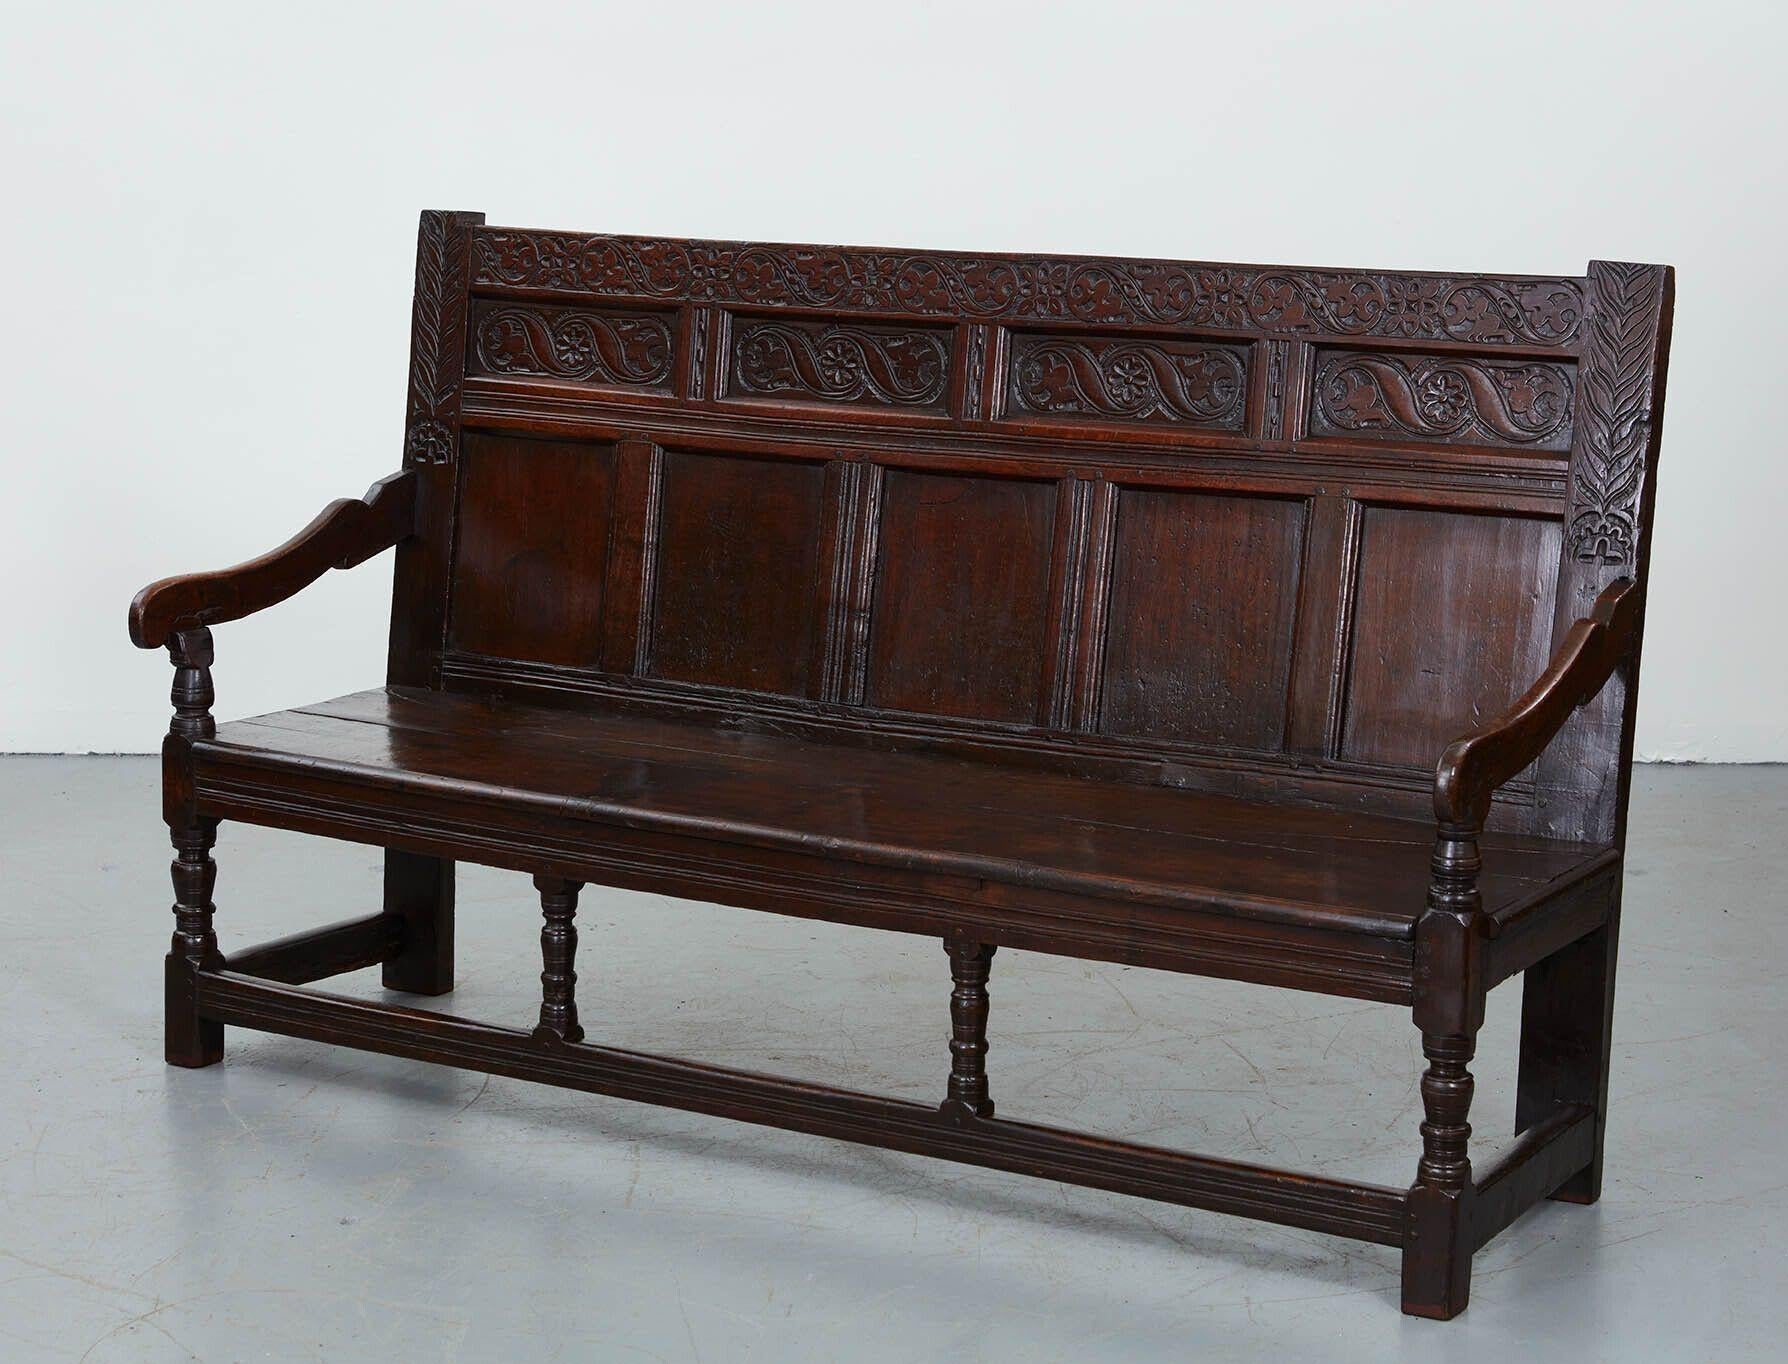 A large early English bog oak paneled back settle, circa 1680.  Of generous proportions, with a series of railed panels on back and carved elements above, shaped downward sloping arms and boarded seat with carved apron supported on front and side